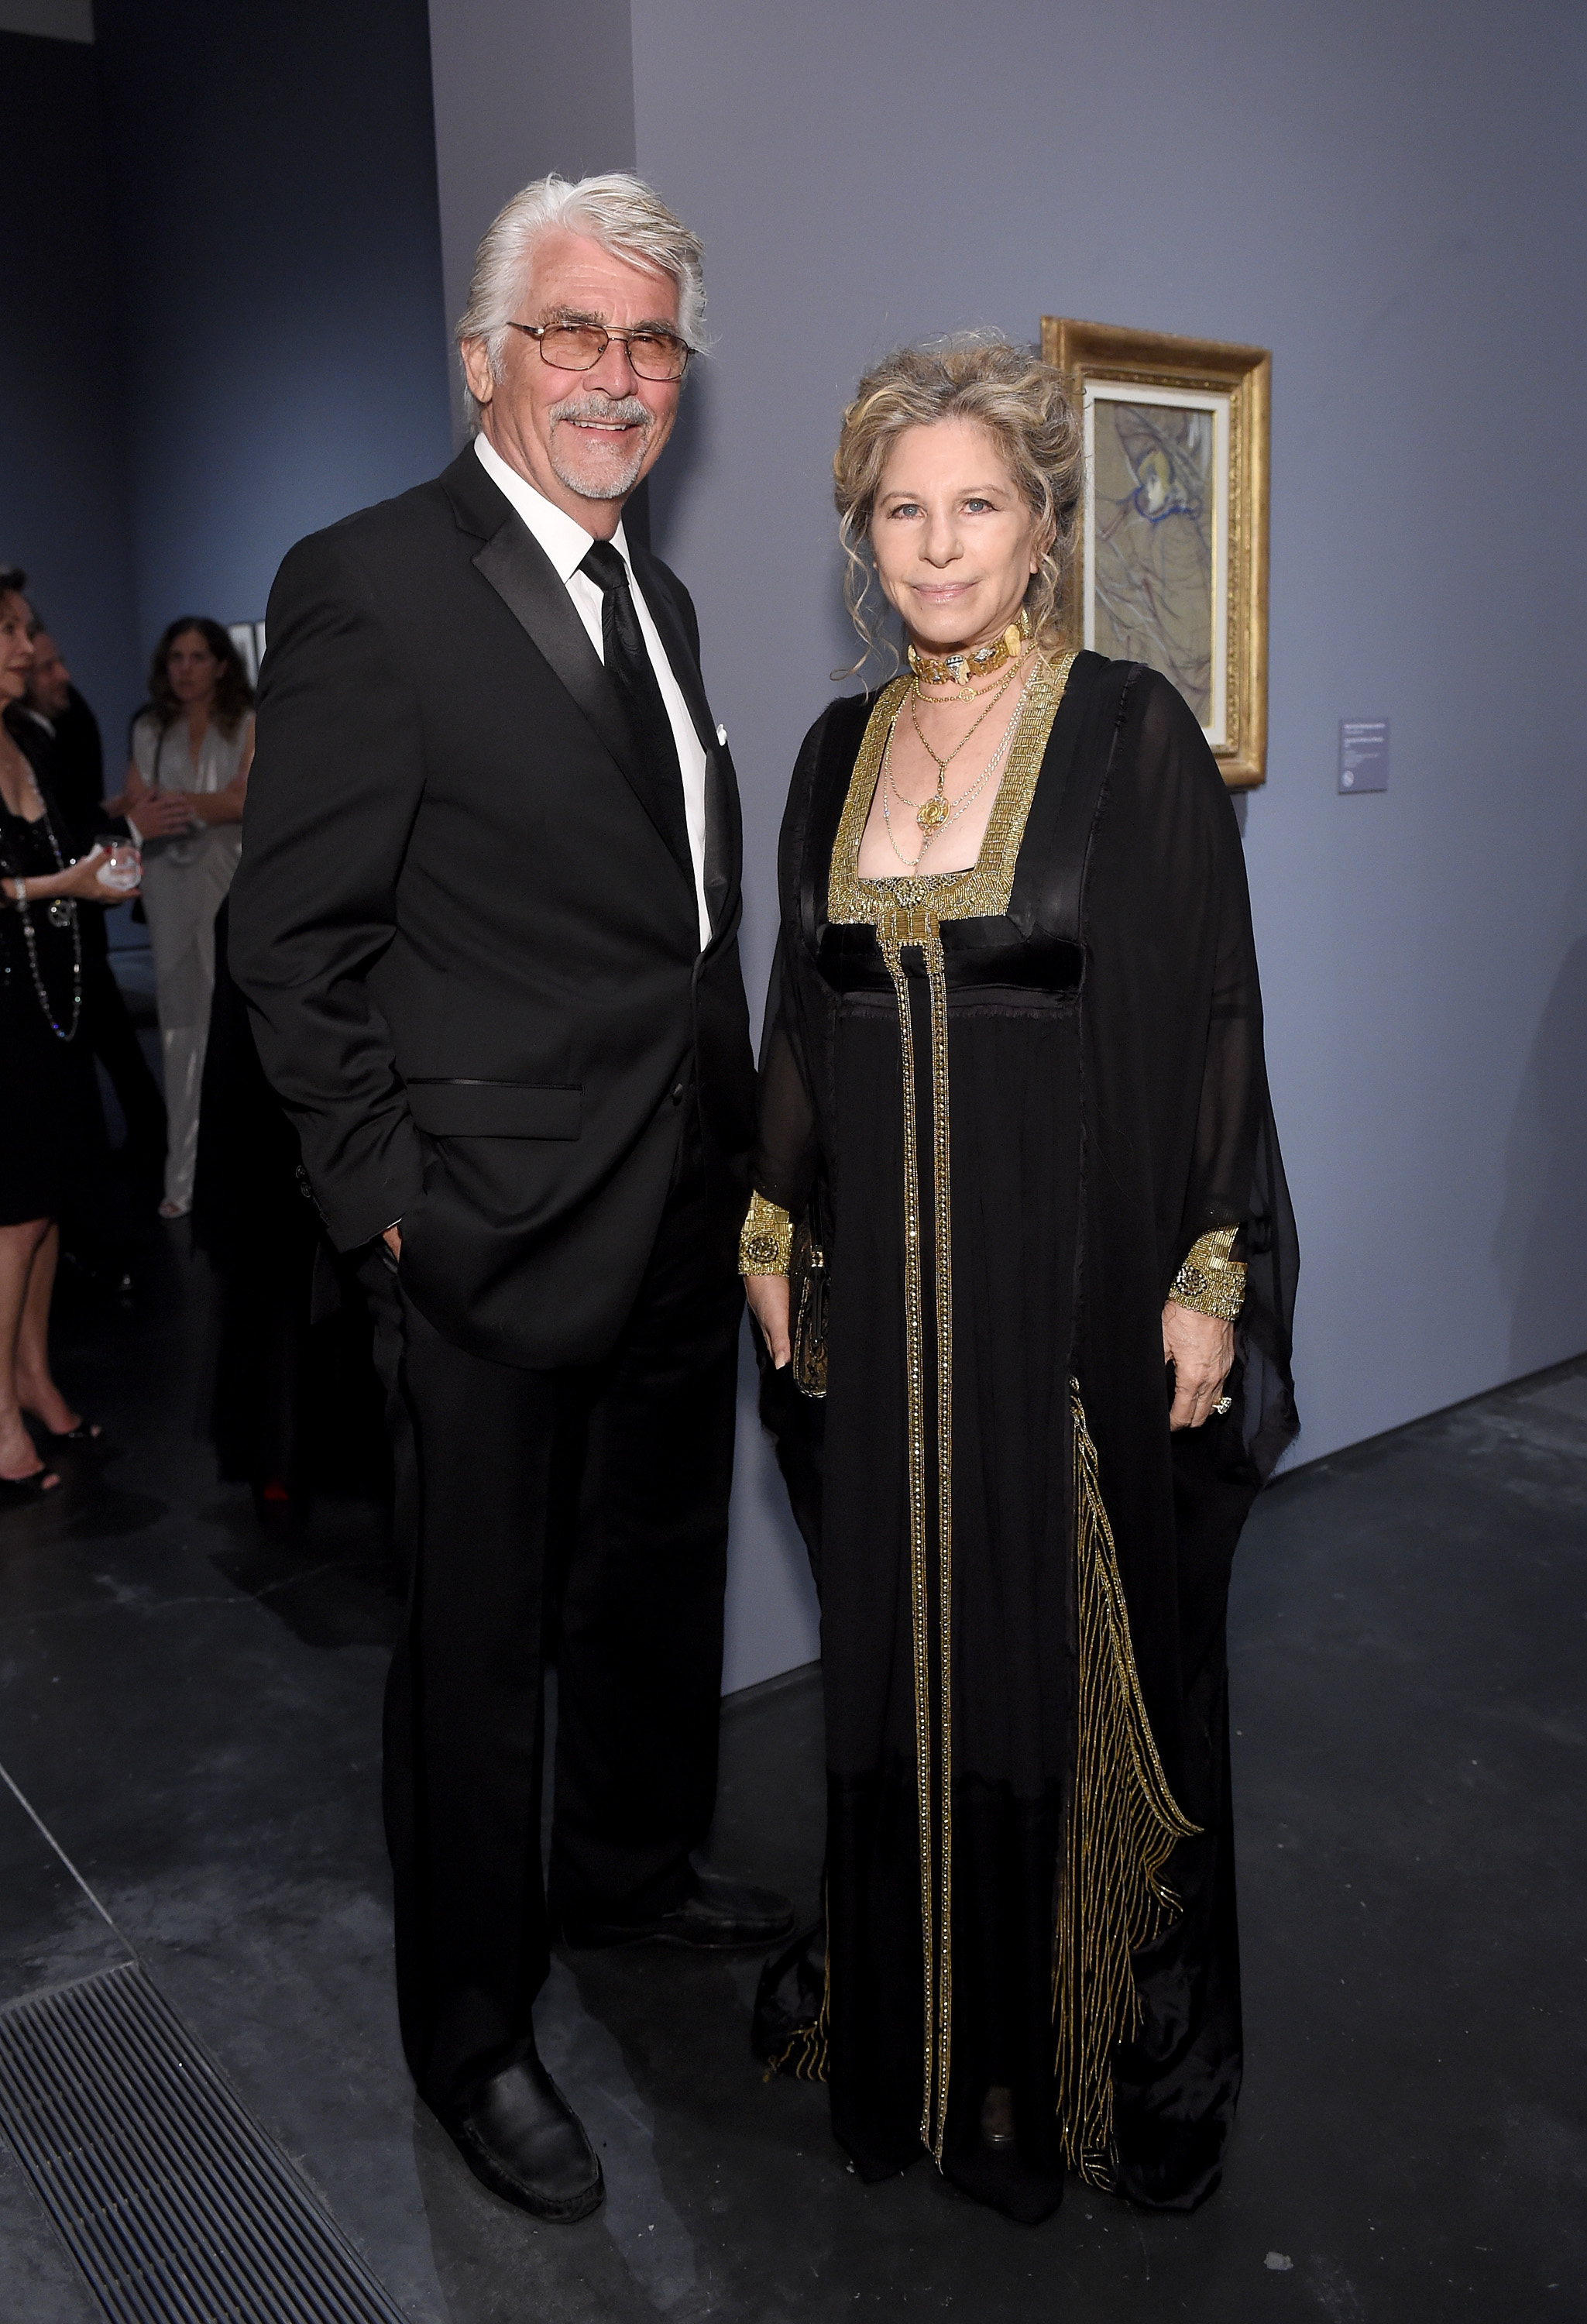 James Brolin and Barbra Streisand have been together for 25 years and counting